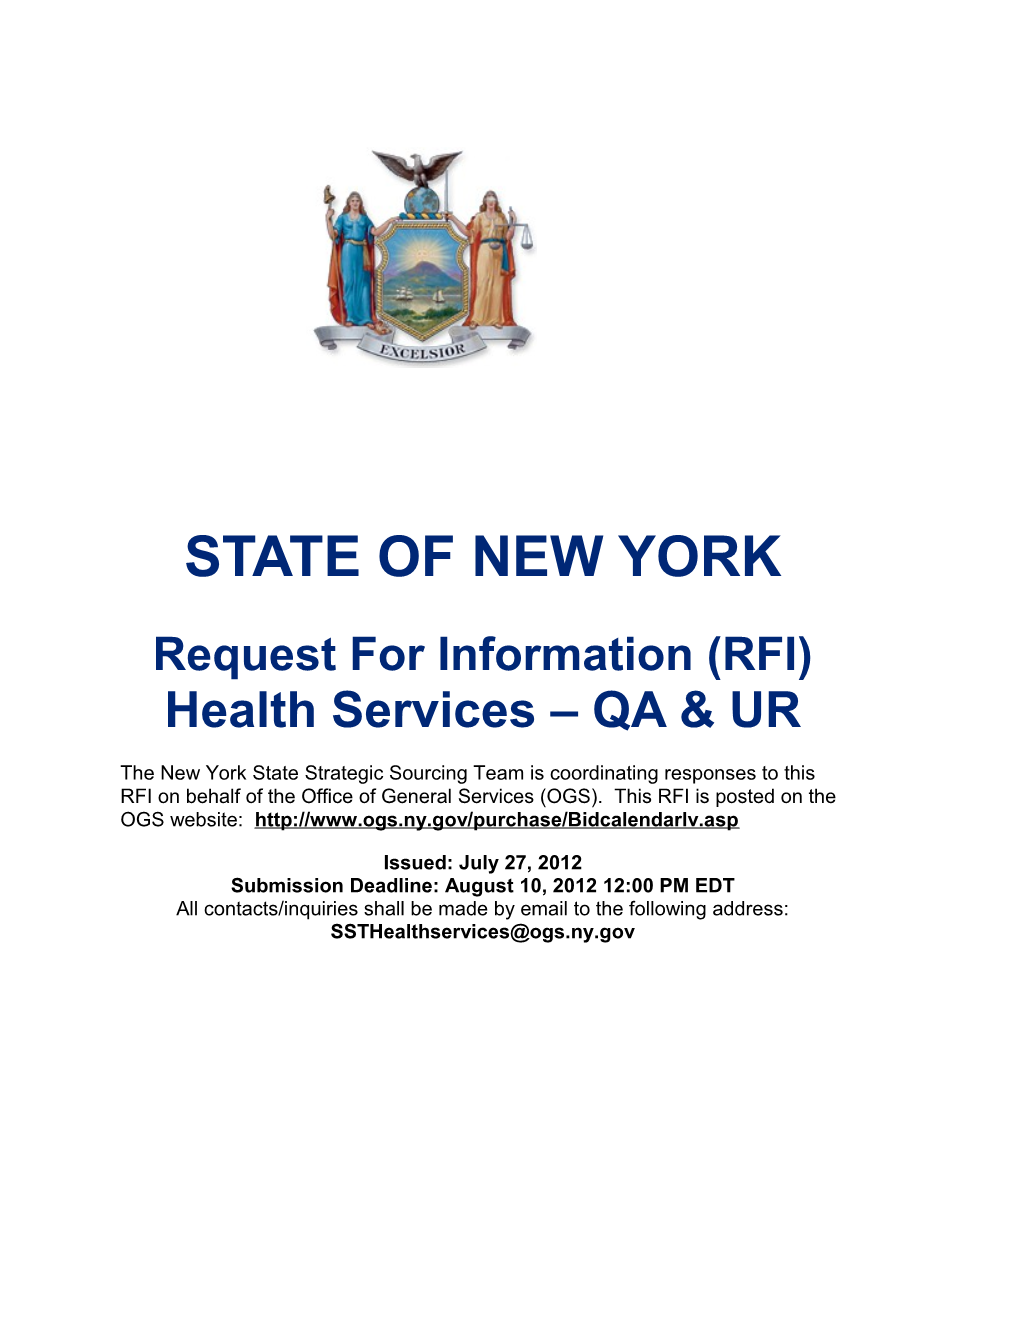 Request for Information Statewide Email Services Page 1 of 2